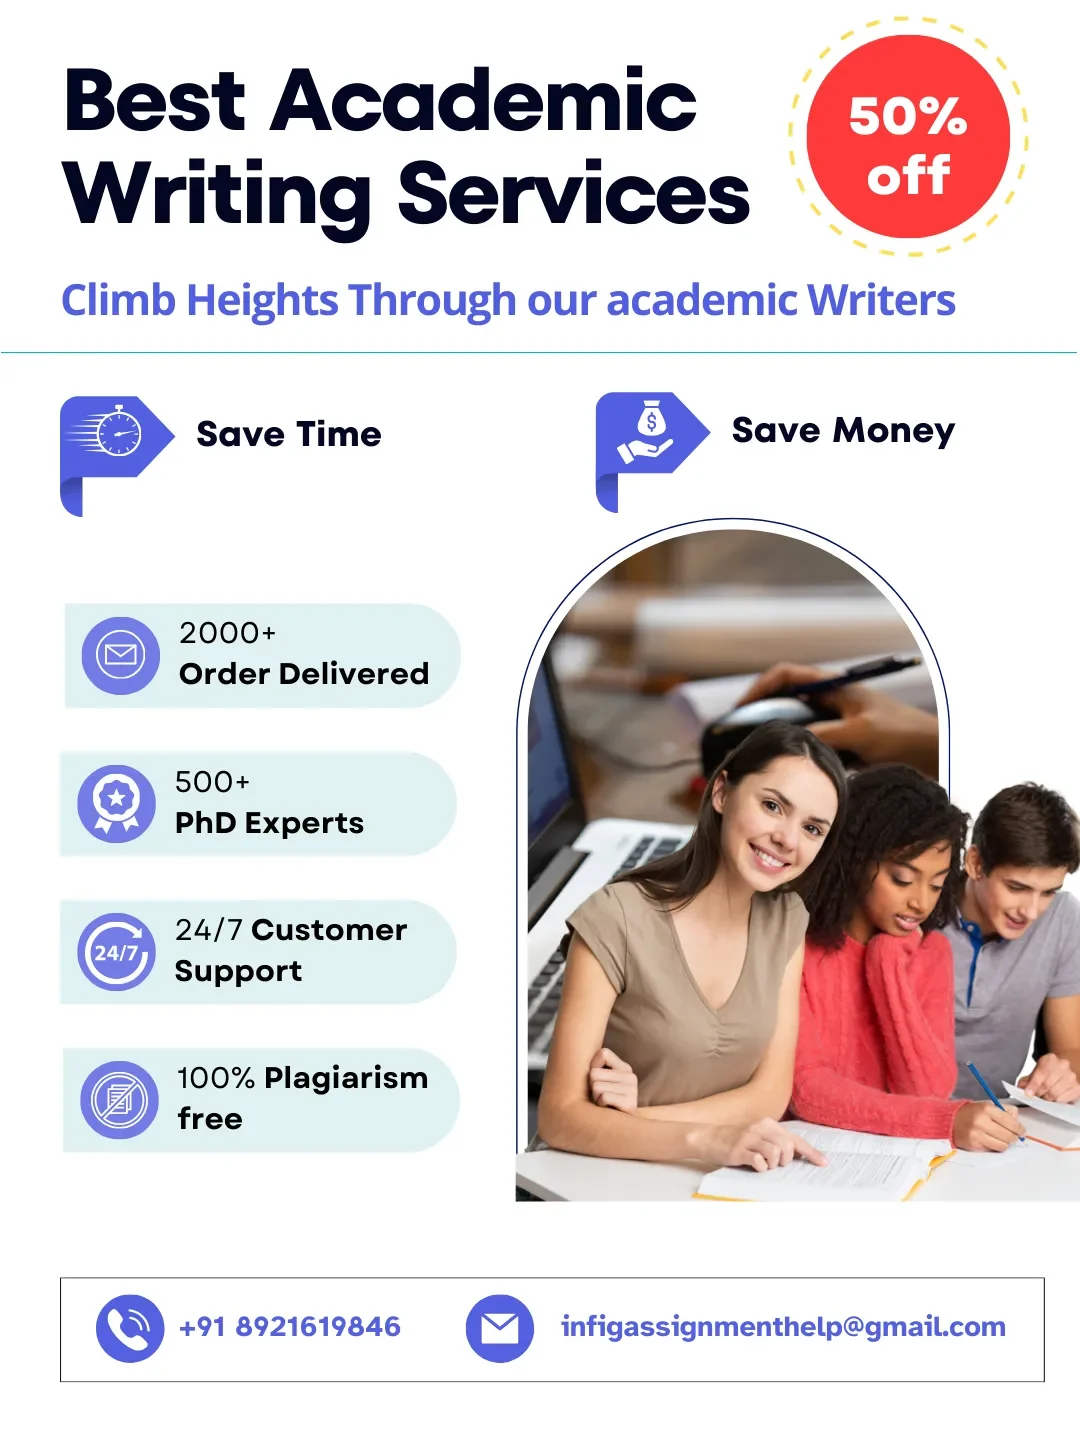 Best academic writing services